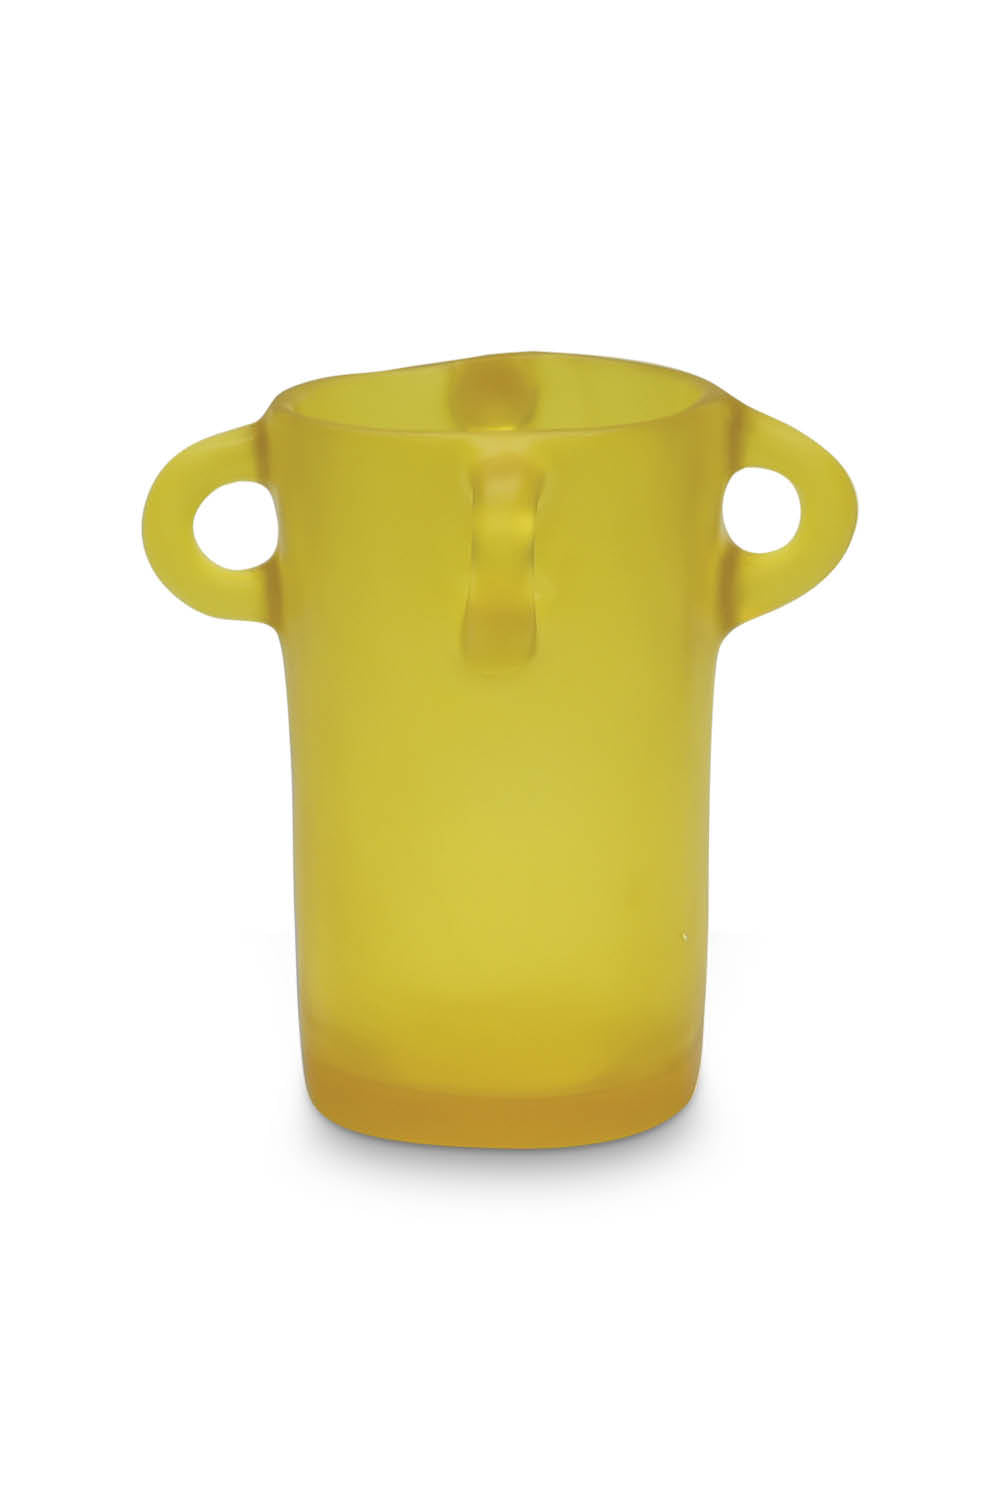 LOOPY Small Vase in Yellow